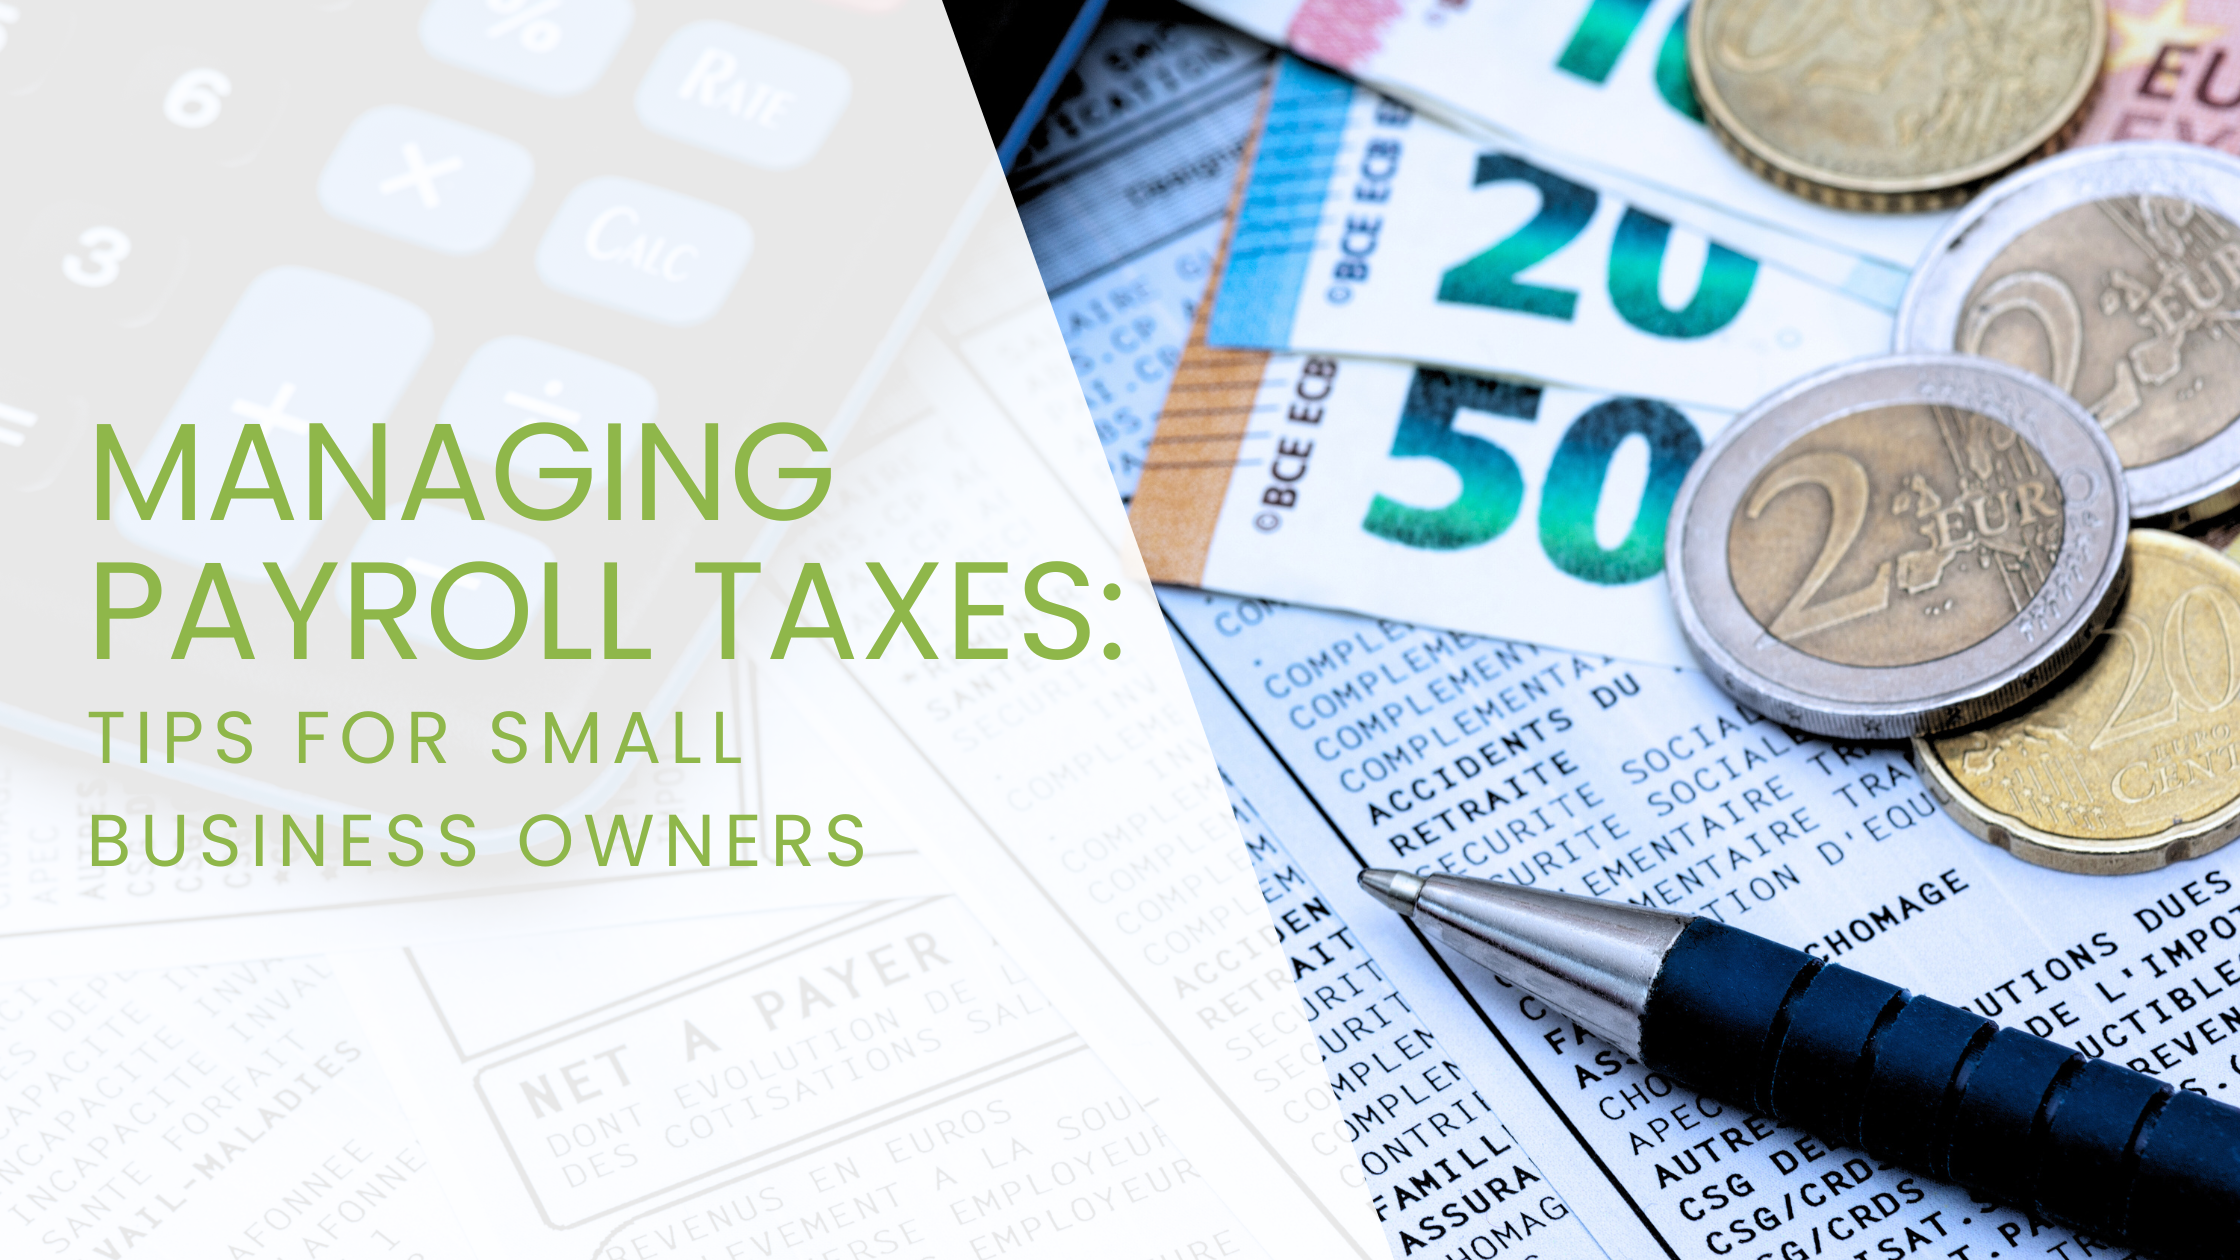 Managing Payroll Taxes: Tips for Small Business Owners